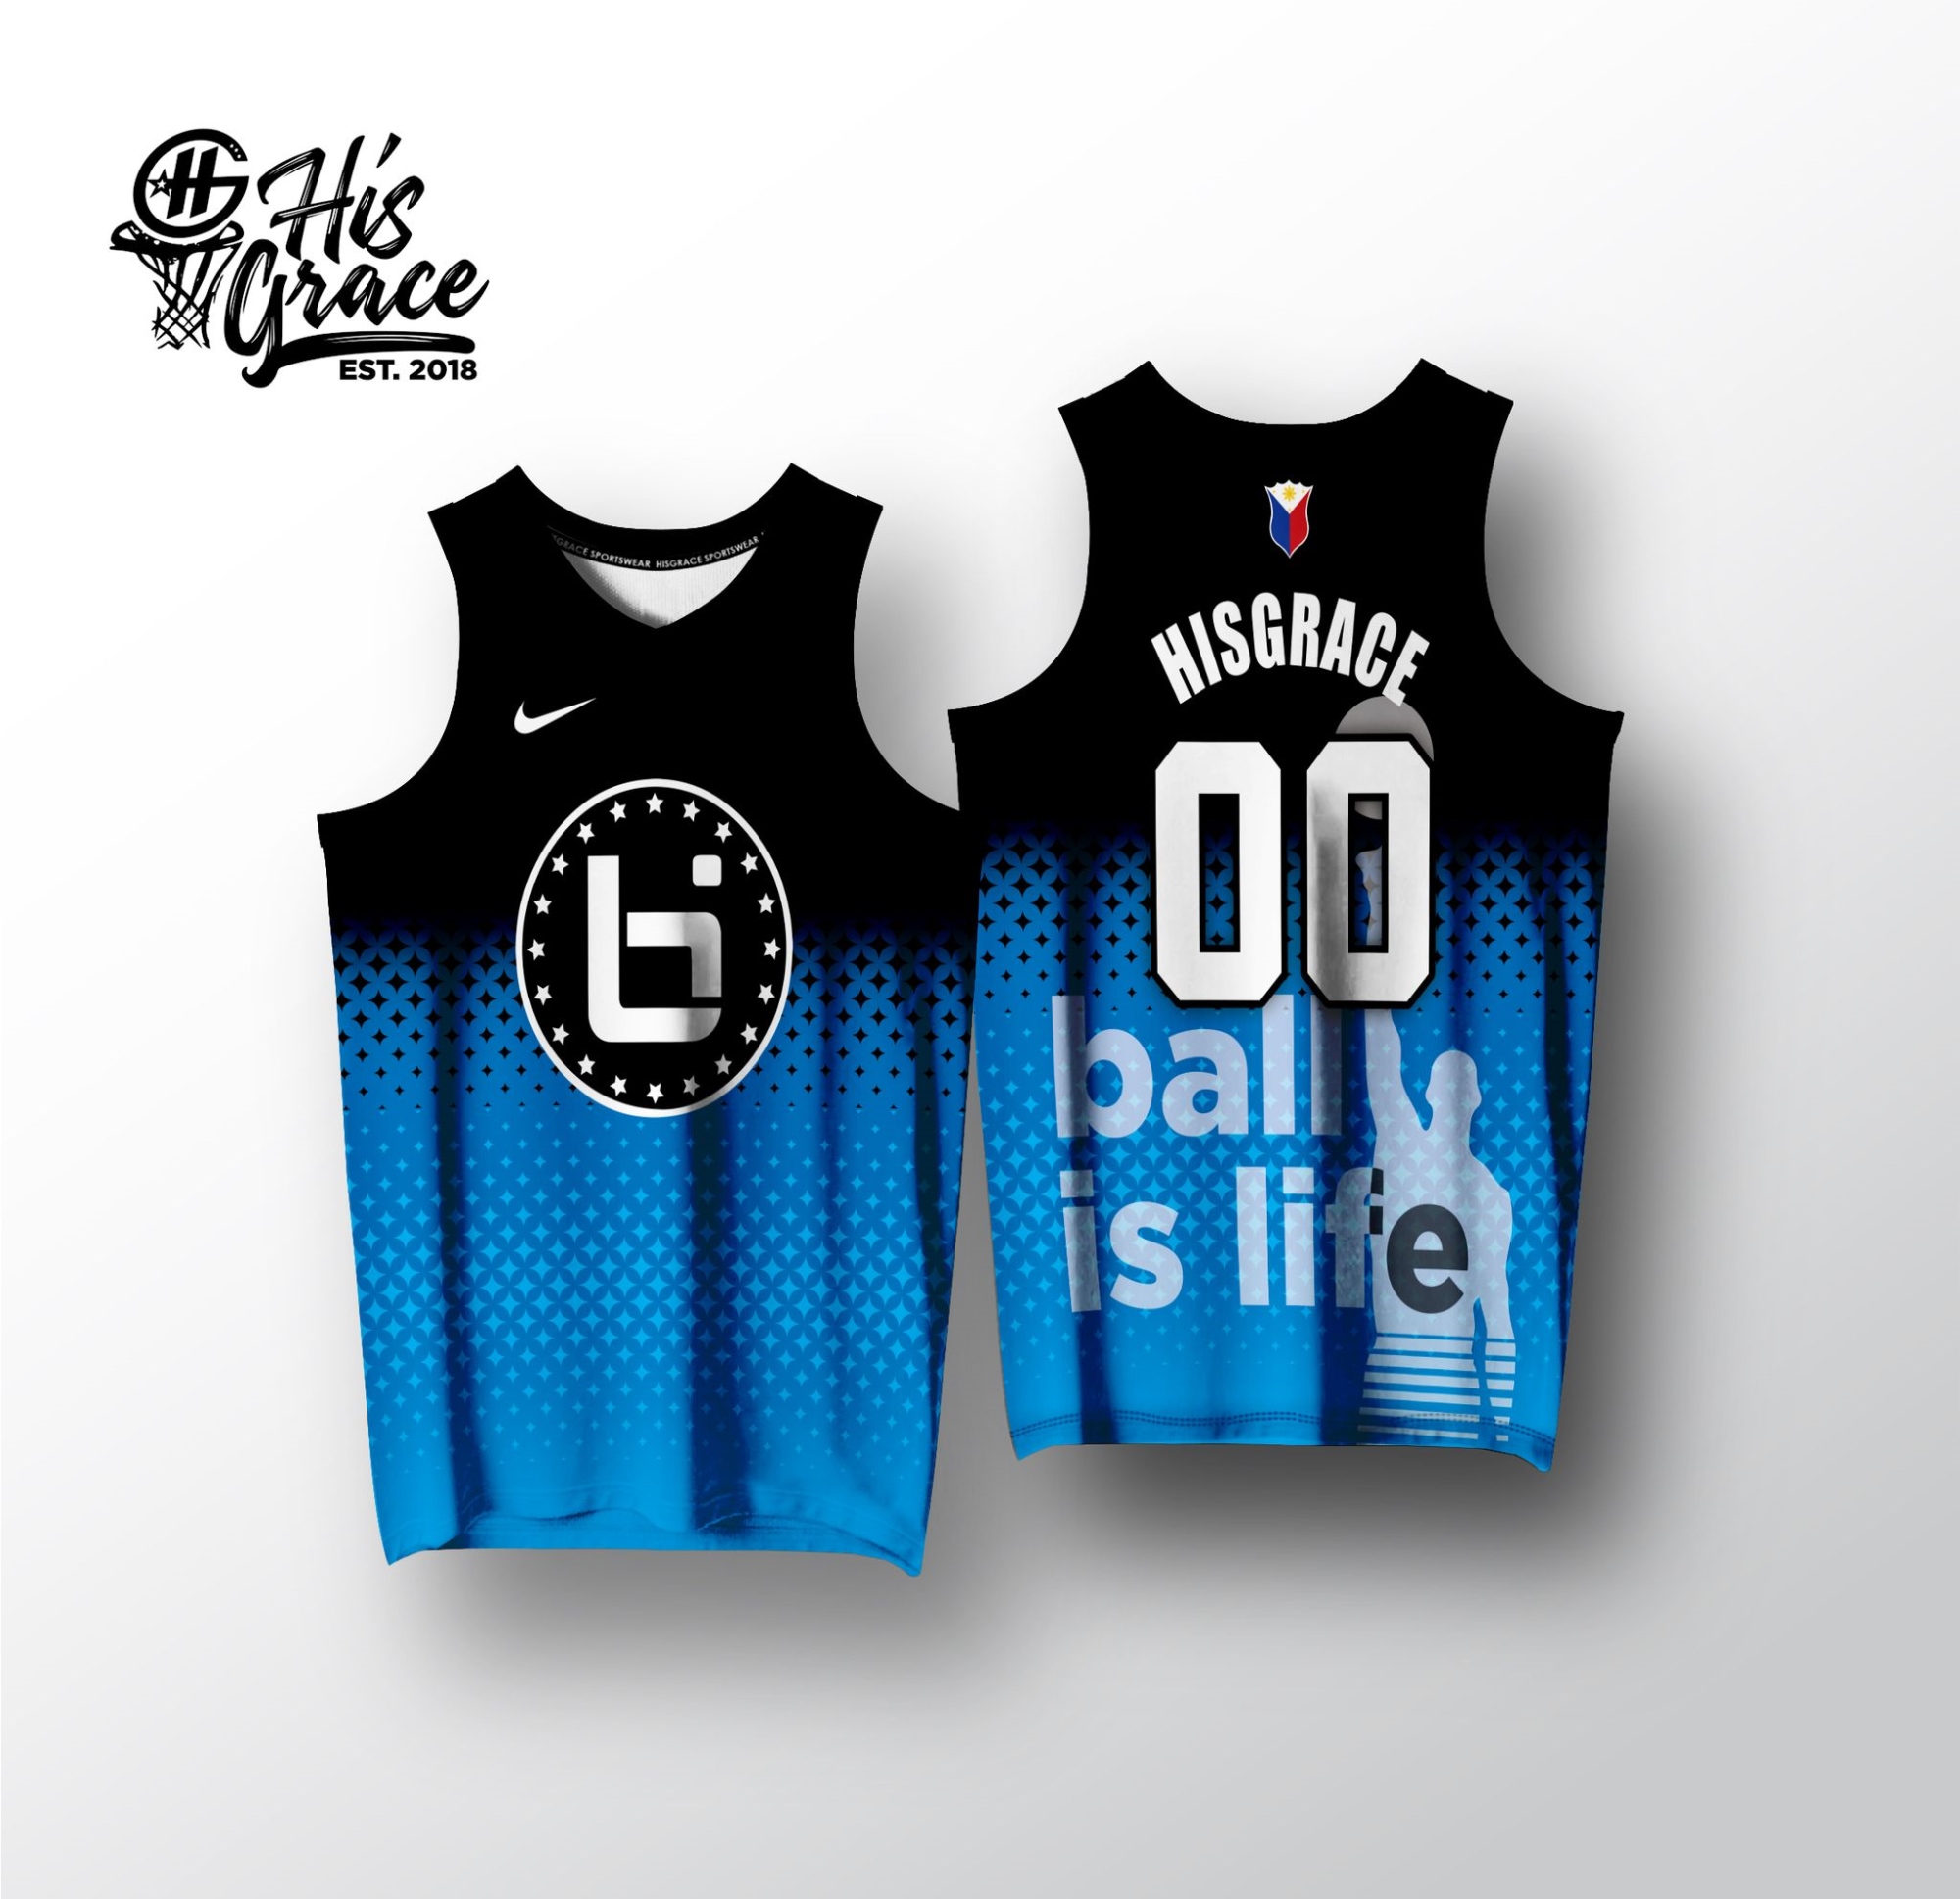 NBA ALL STAR BLUE RED JAMES HG JERSEY FULL SUBLIMATION